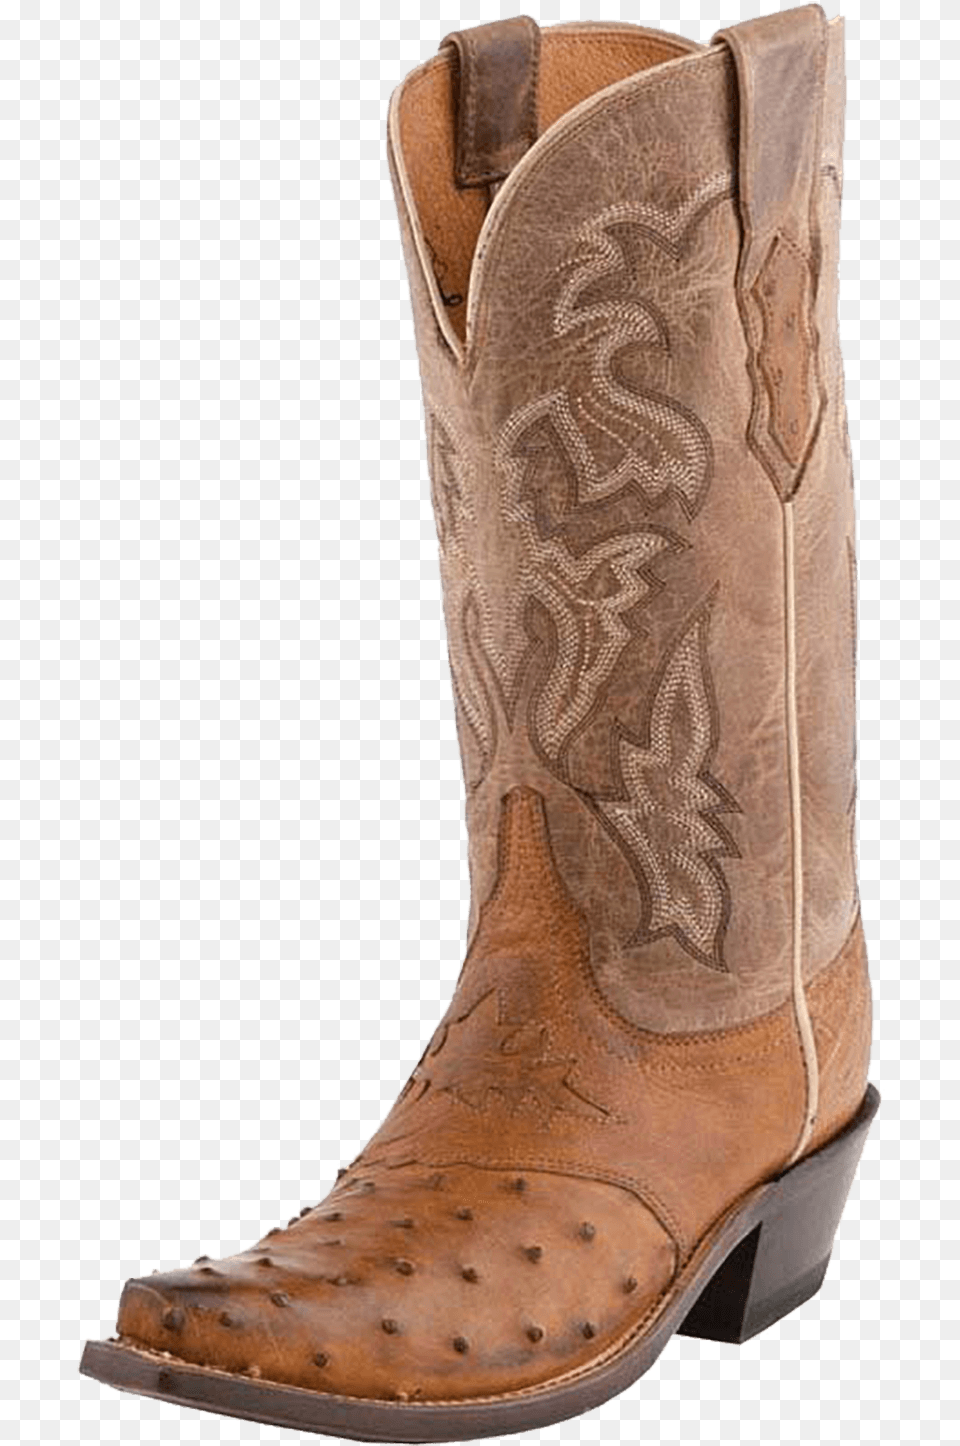 Lucchese 1883 Women S Ostrich Cowgirl Boot Cowboy Boot, Clothing, Footwear, Cowboy Boot, Shoe Png Image